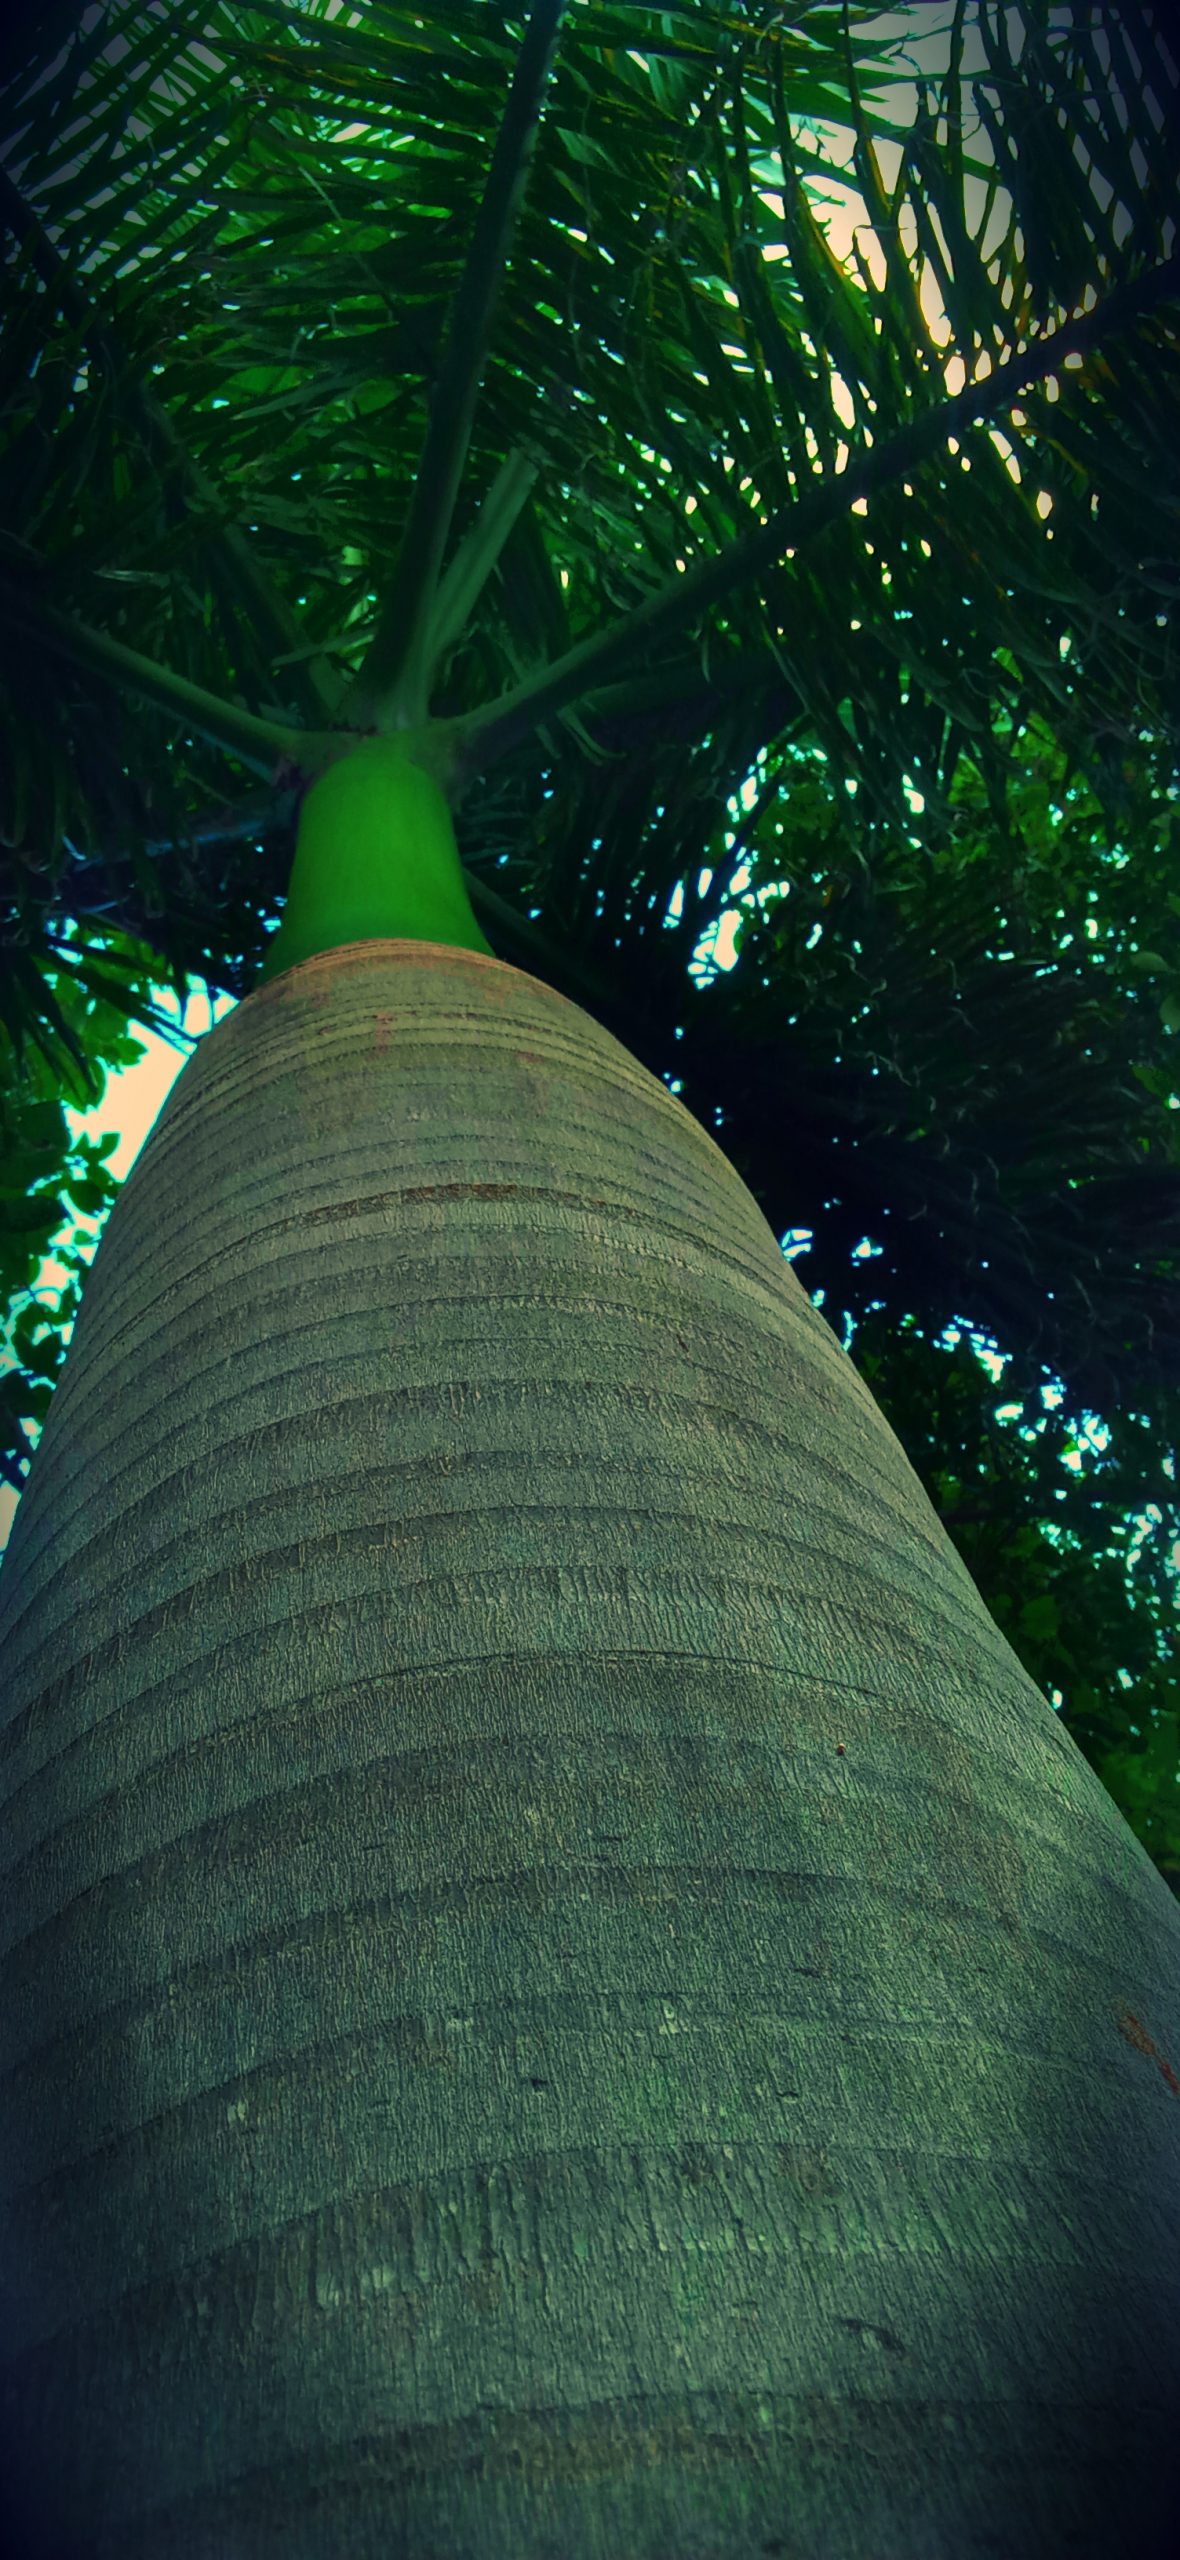 Trunk of a palm tree